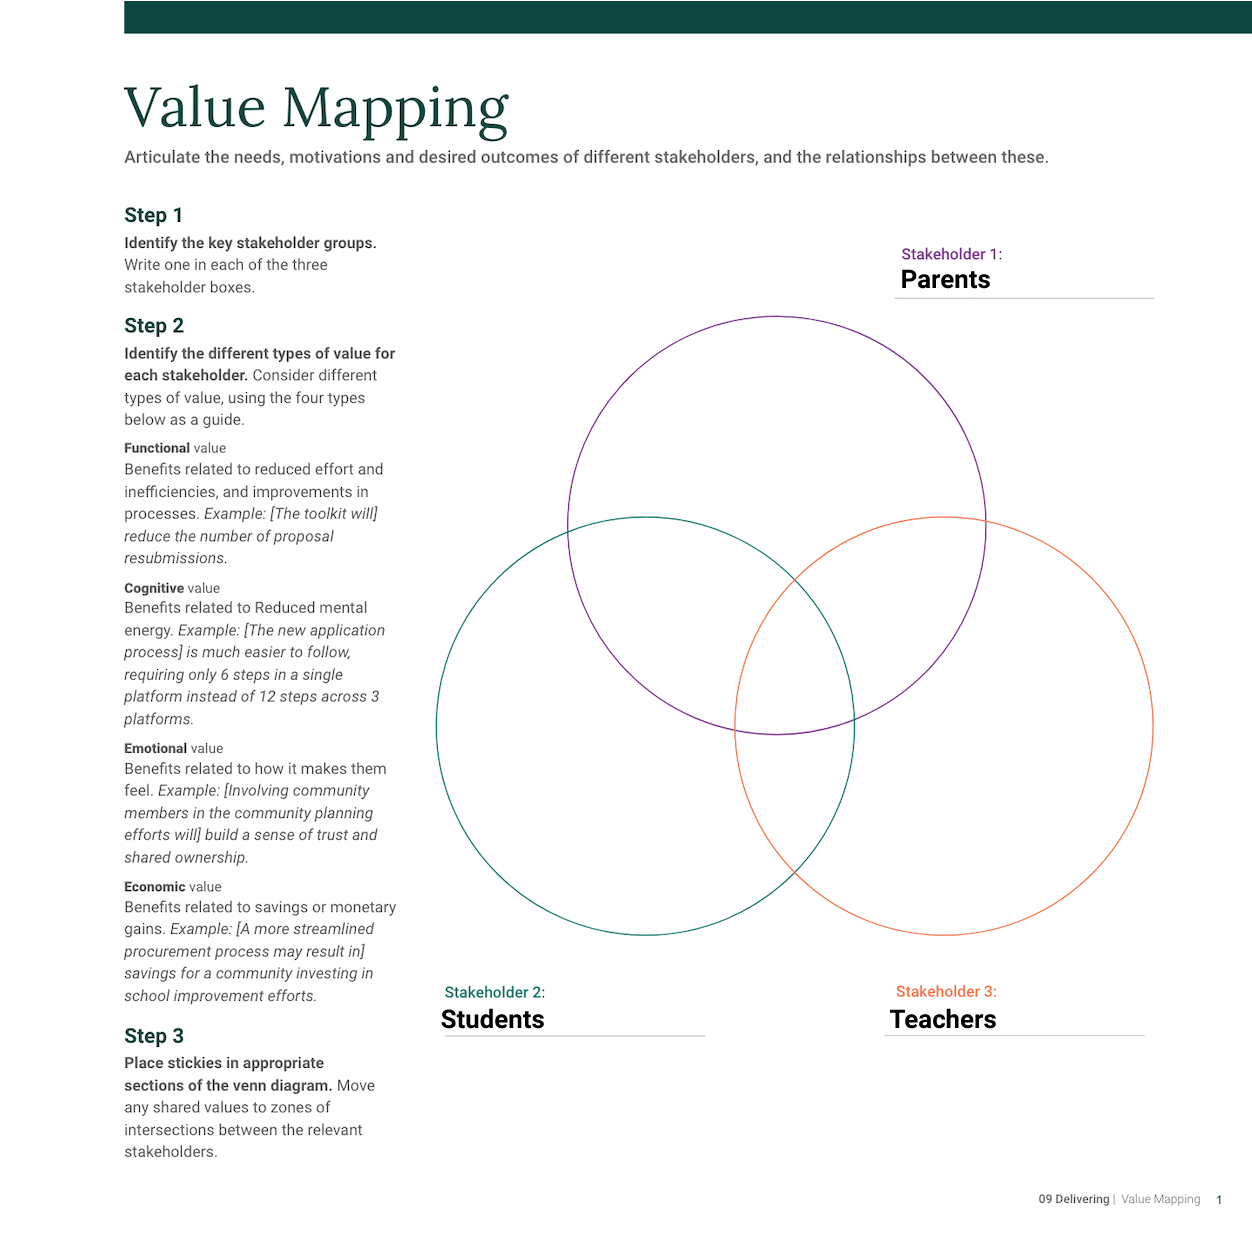 image of 3 overlapping circles on the value mapping worksheet